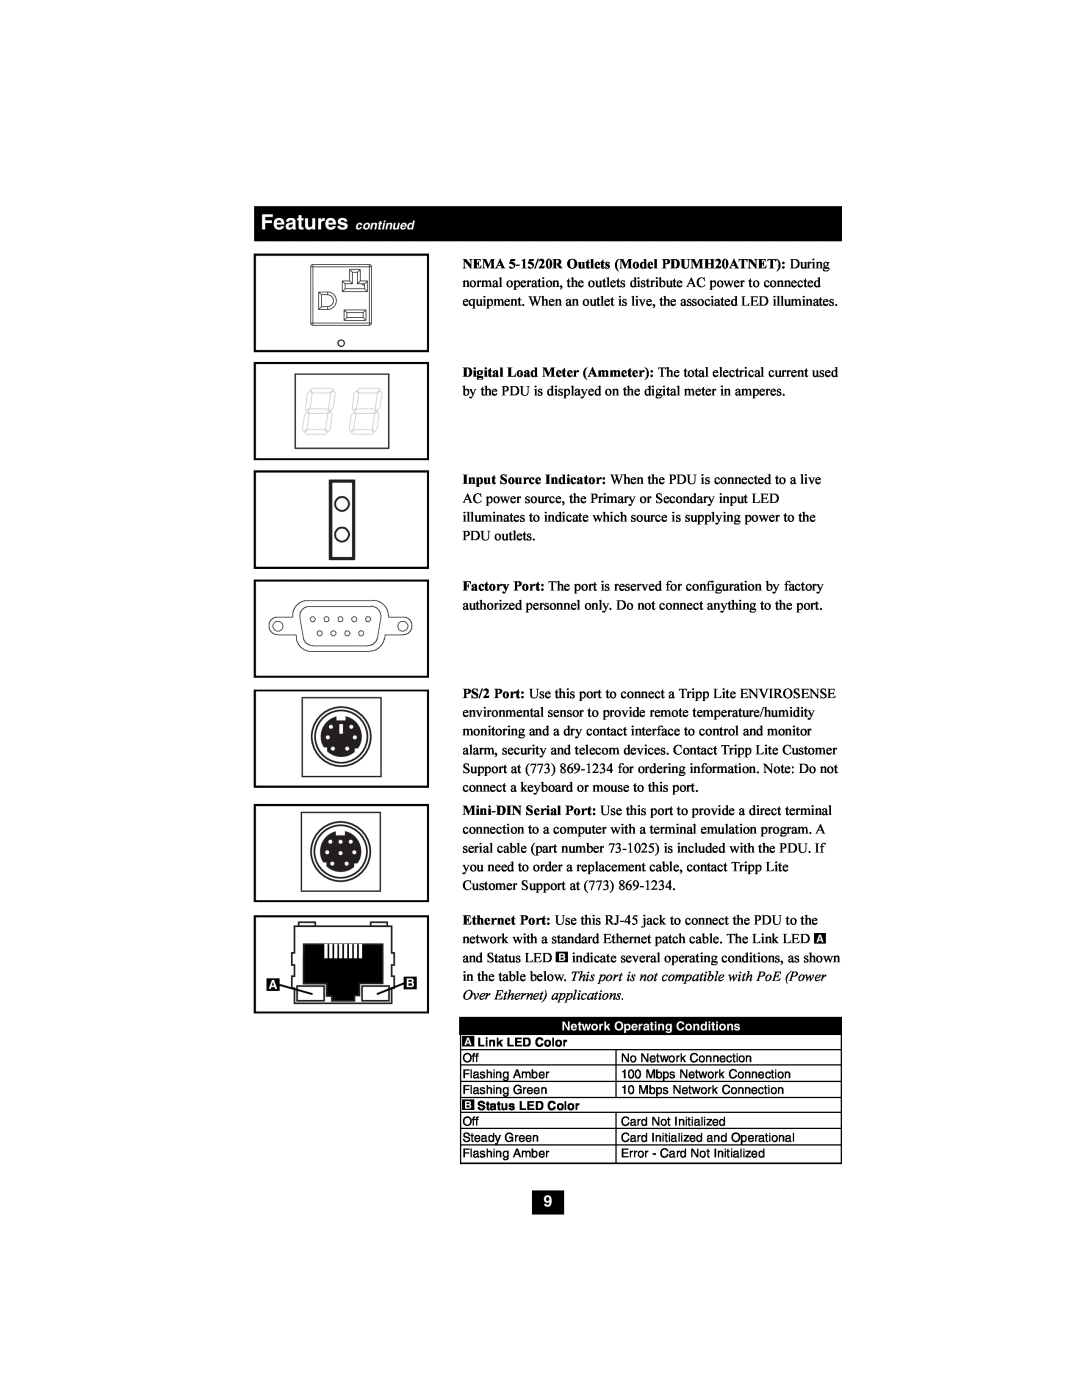 Tripp Lite PDUMH15ATNET, PDUMH20ATNET owner manual Features continued, Network Operating Conditions 